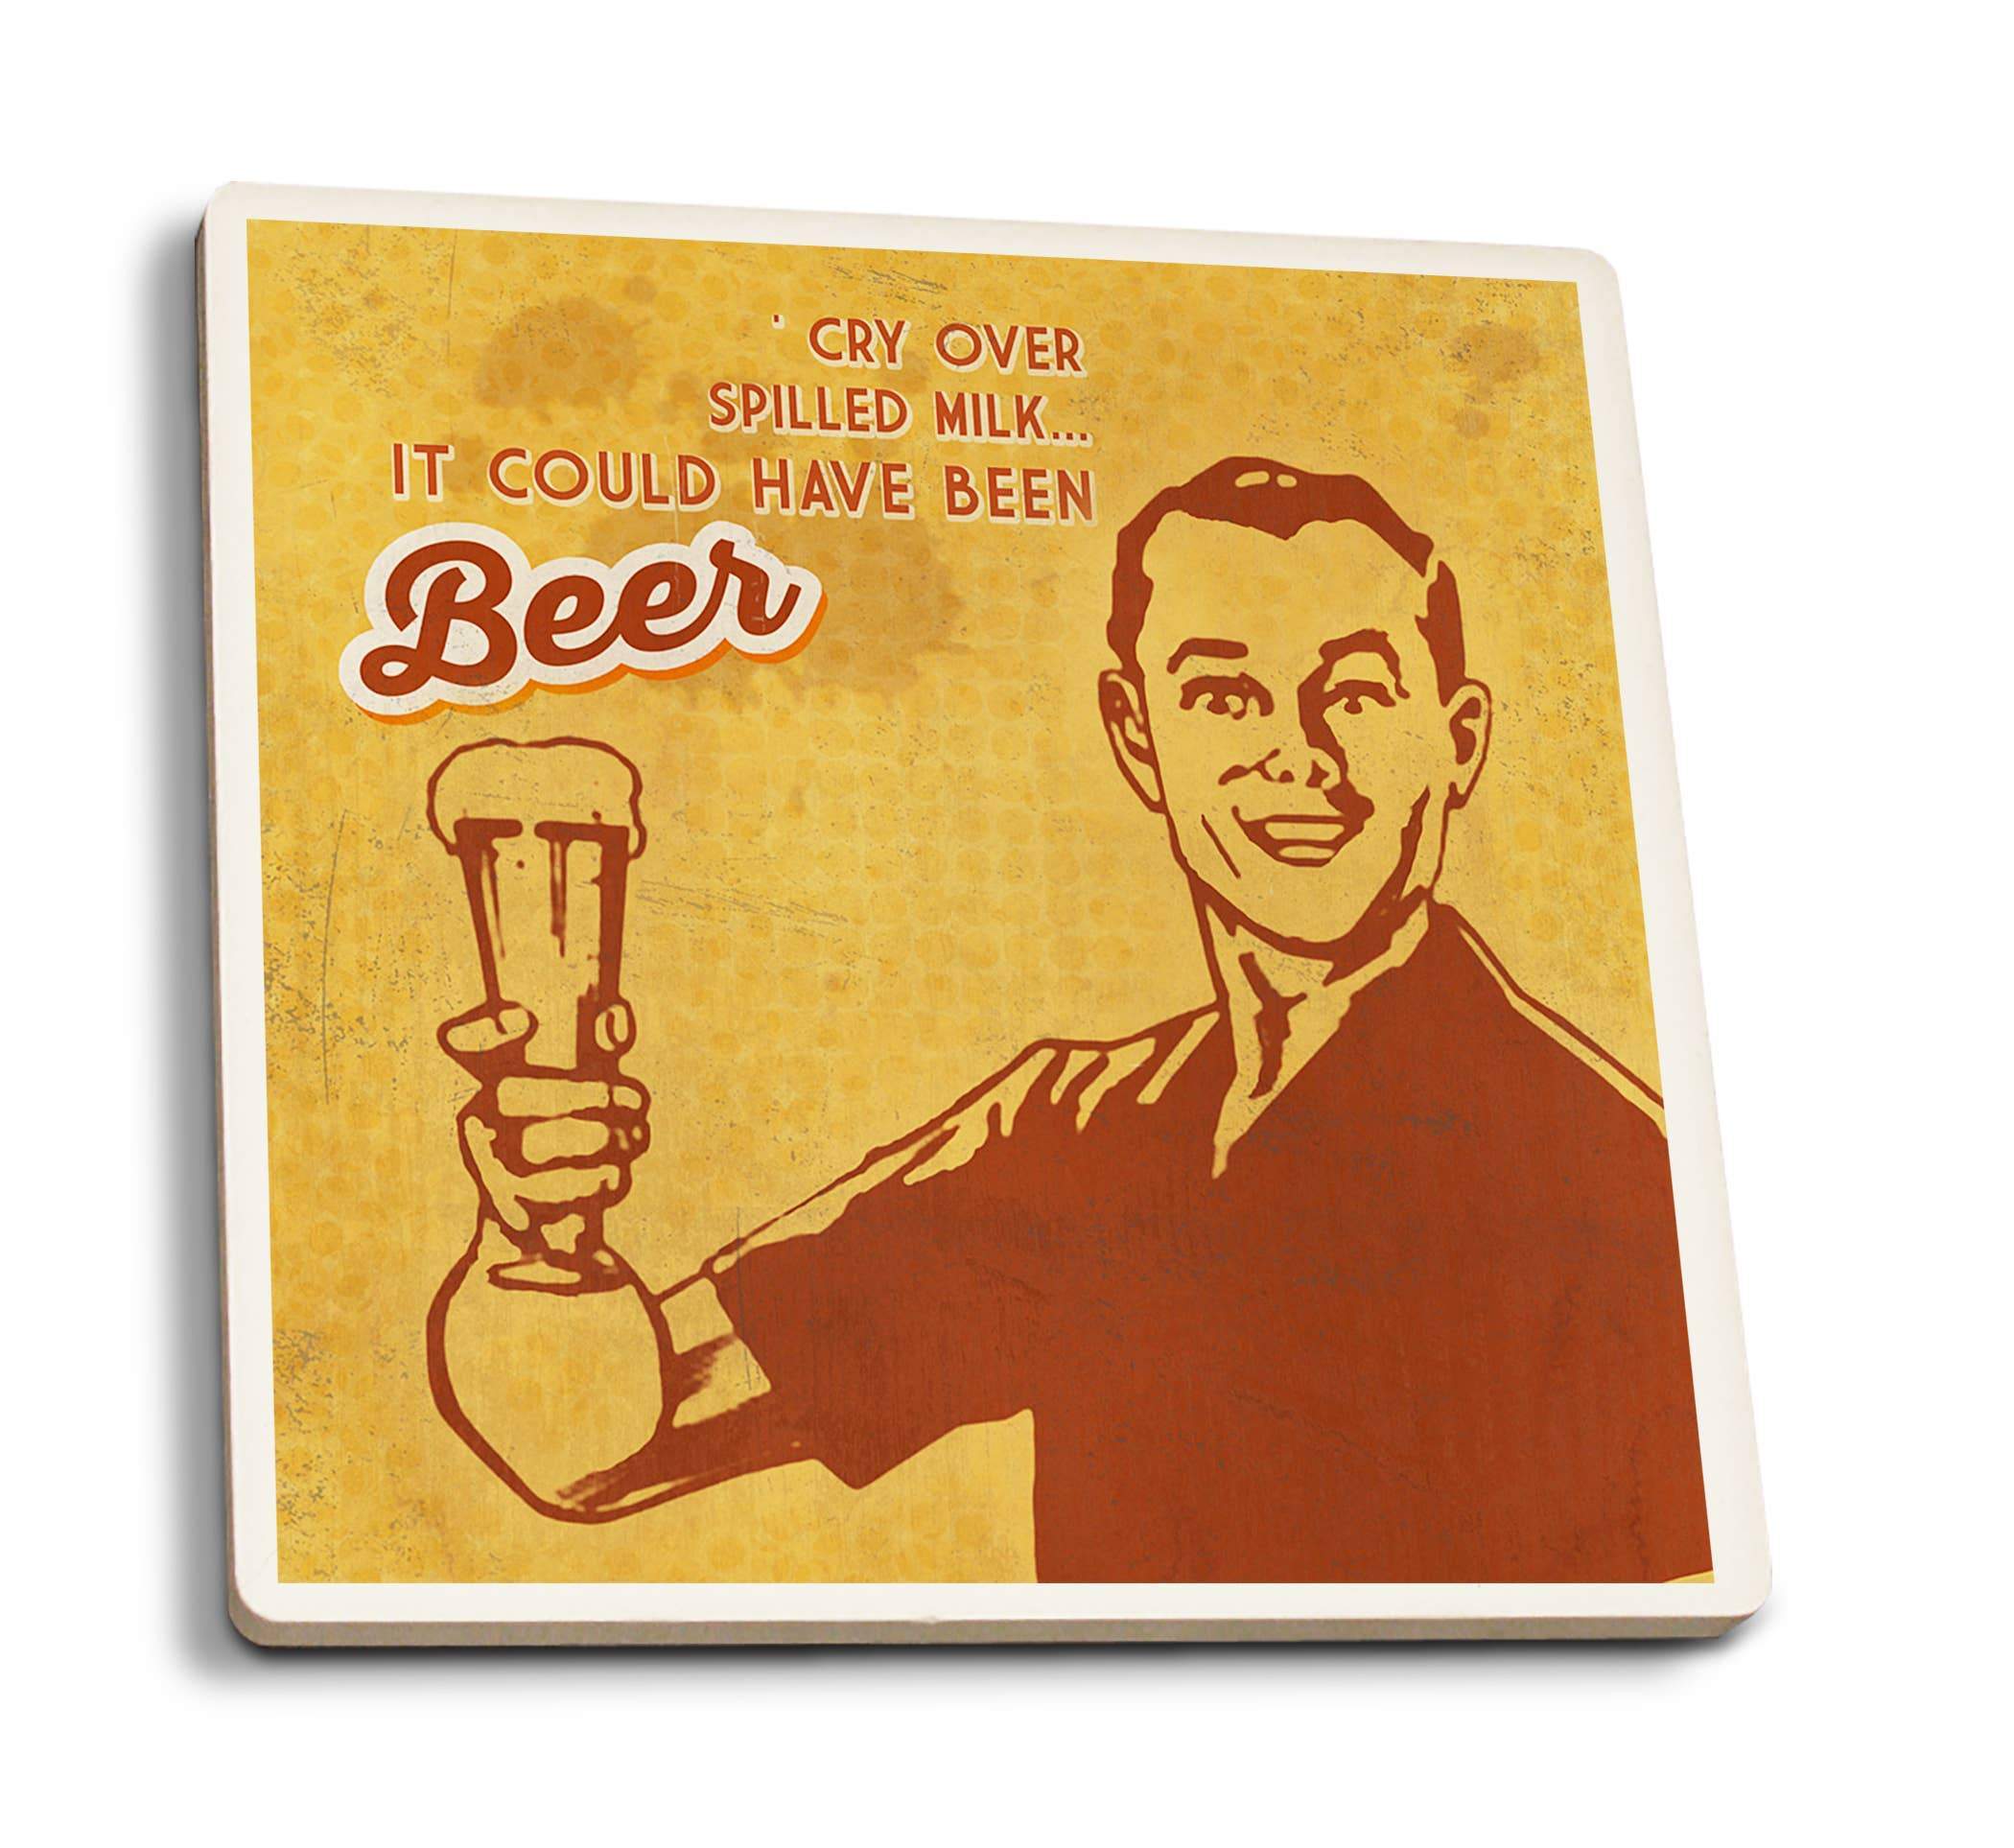 It Could Have Been Beer Ceramic Coaster Set of 4 - Ranch Junkie Mercantile LLC